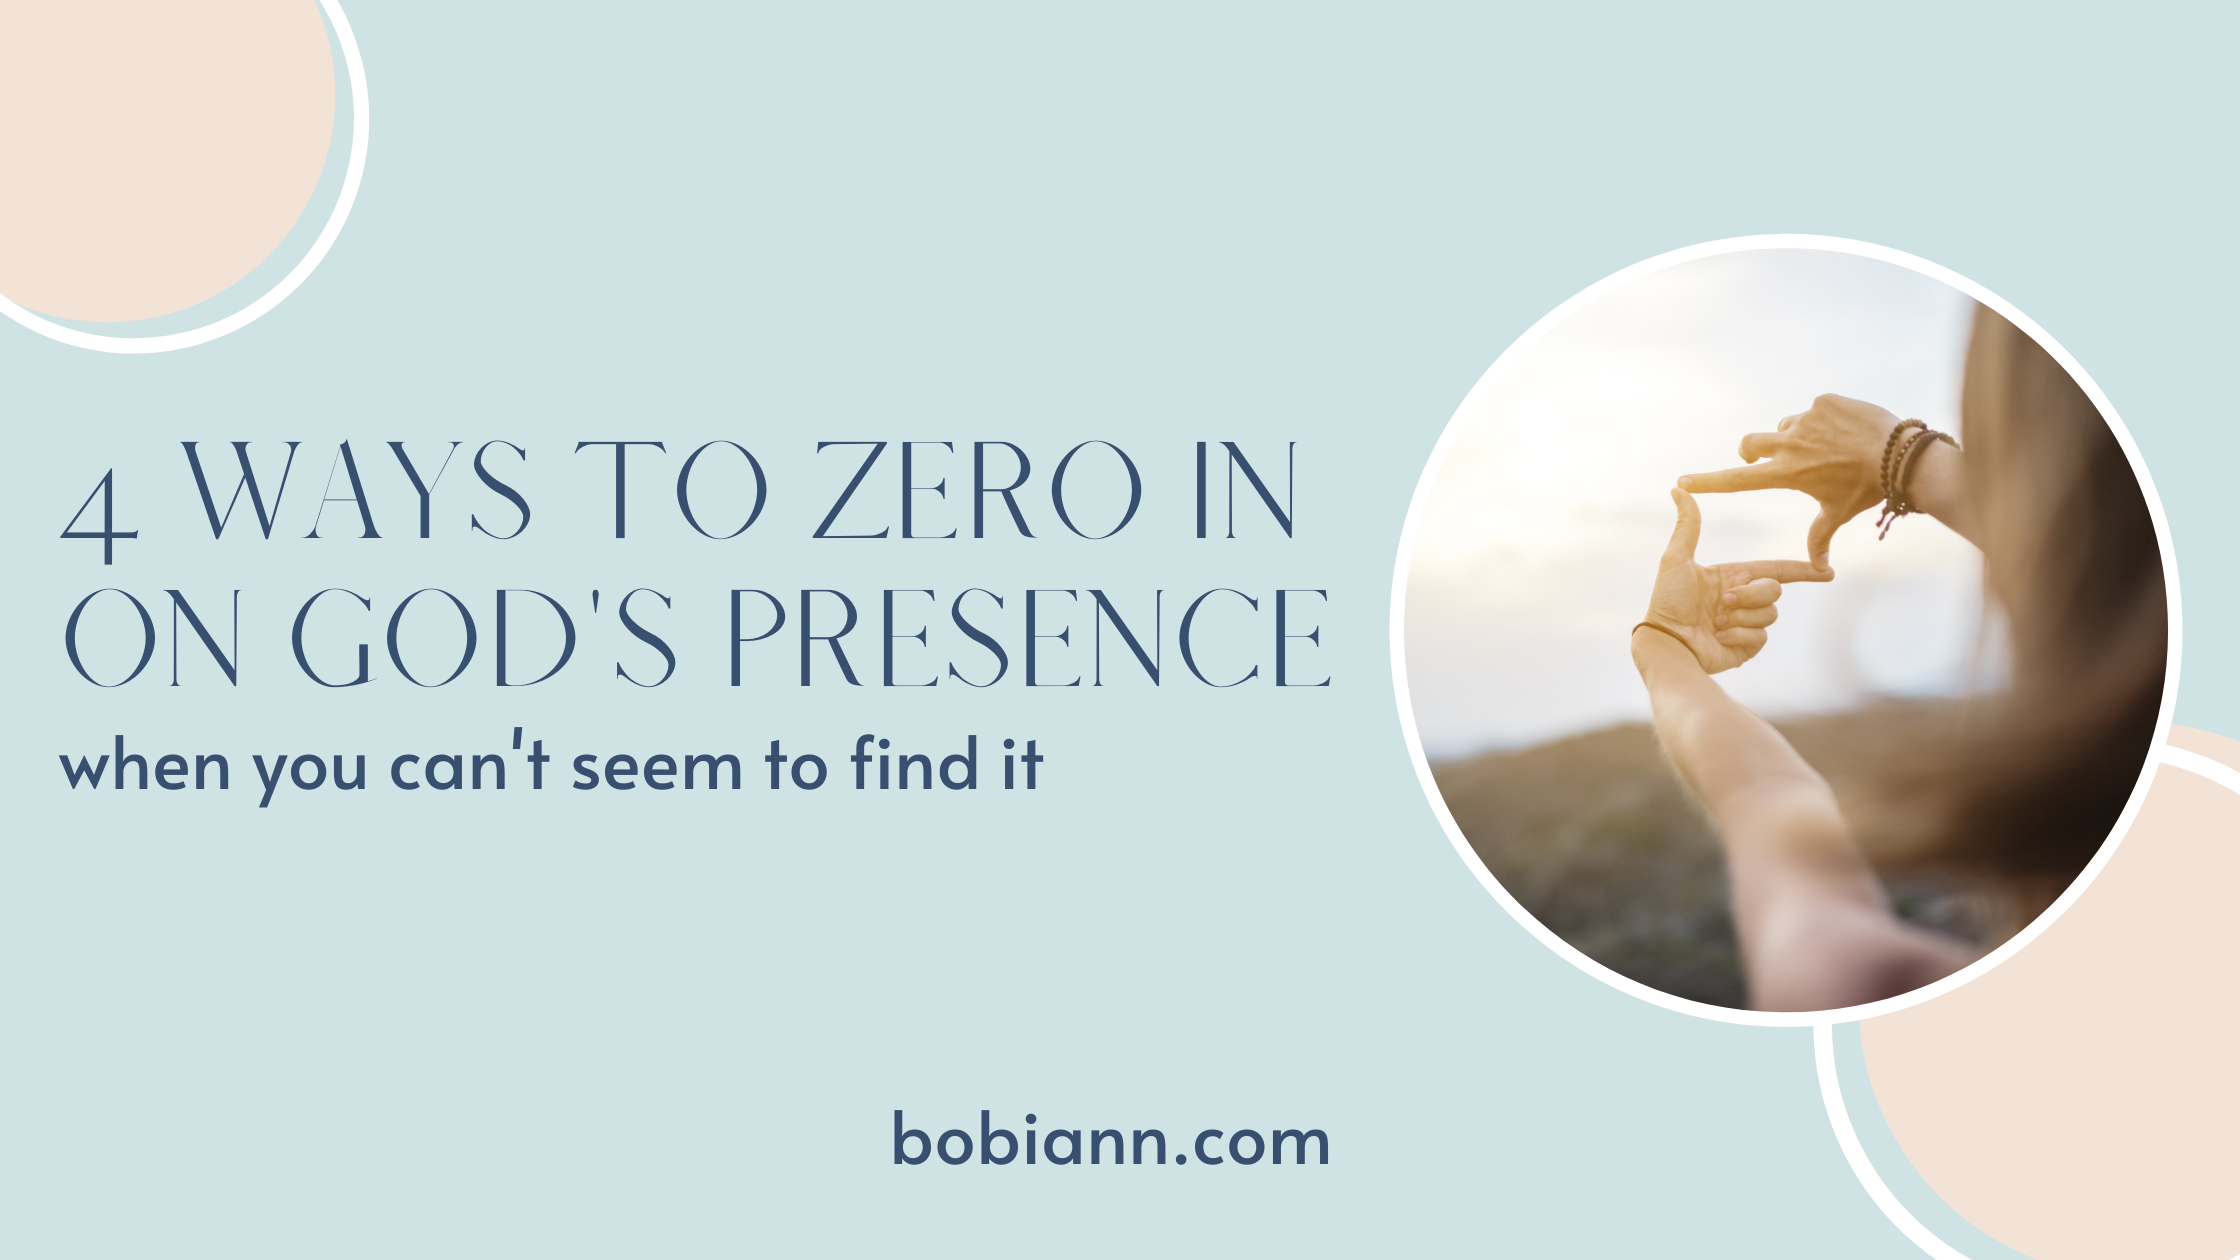 4 ways to zero in on God’s presence when you can’t seem to find it